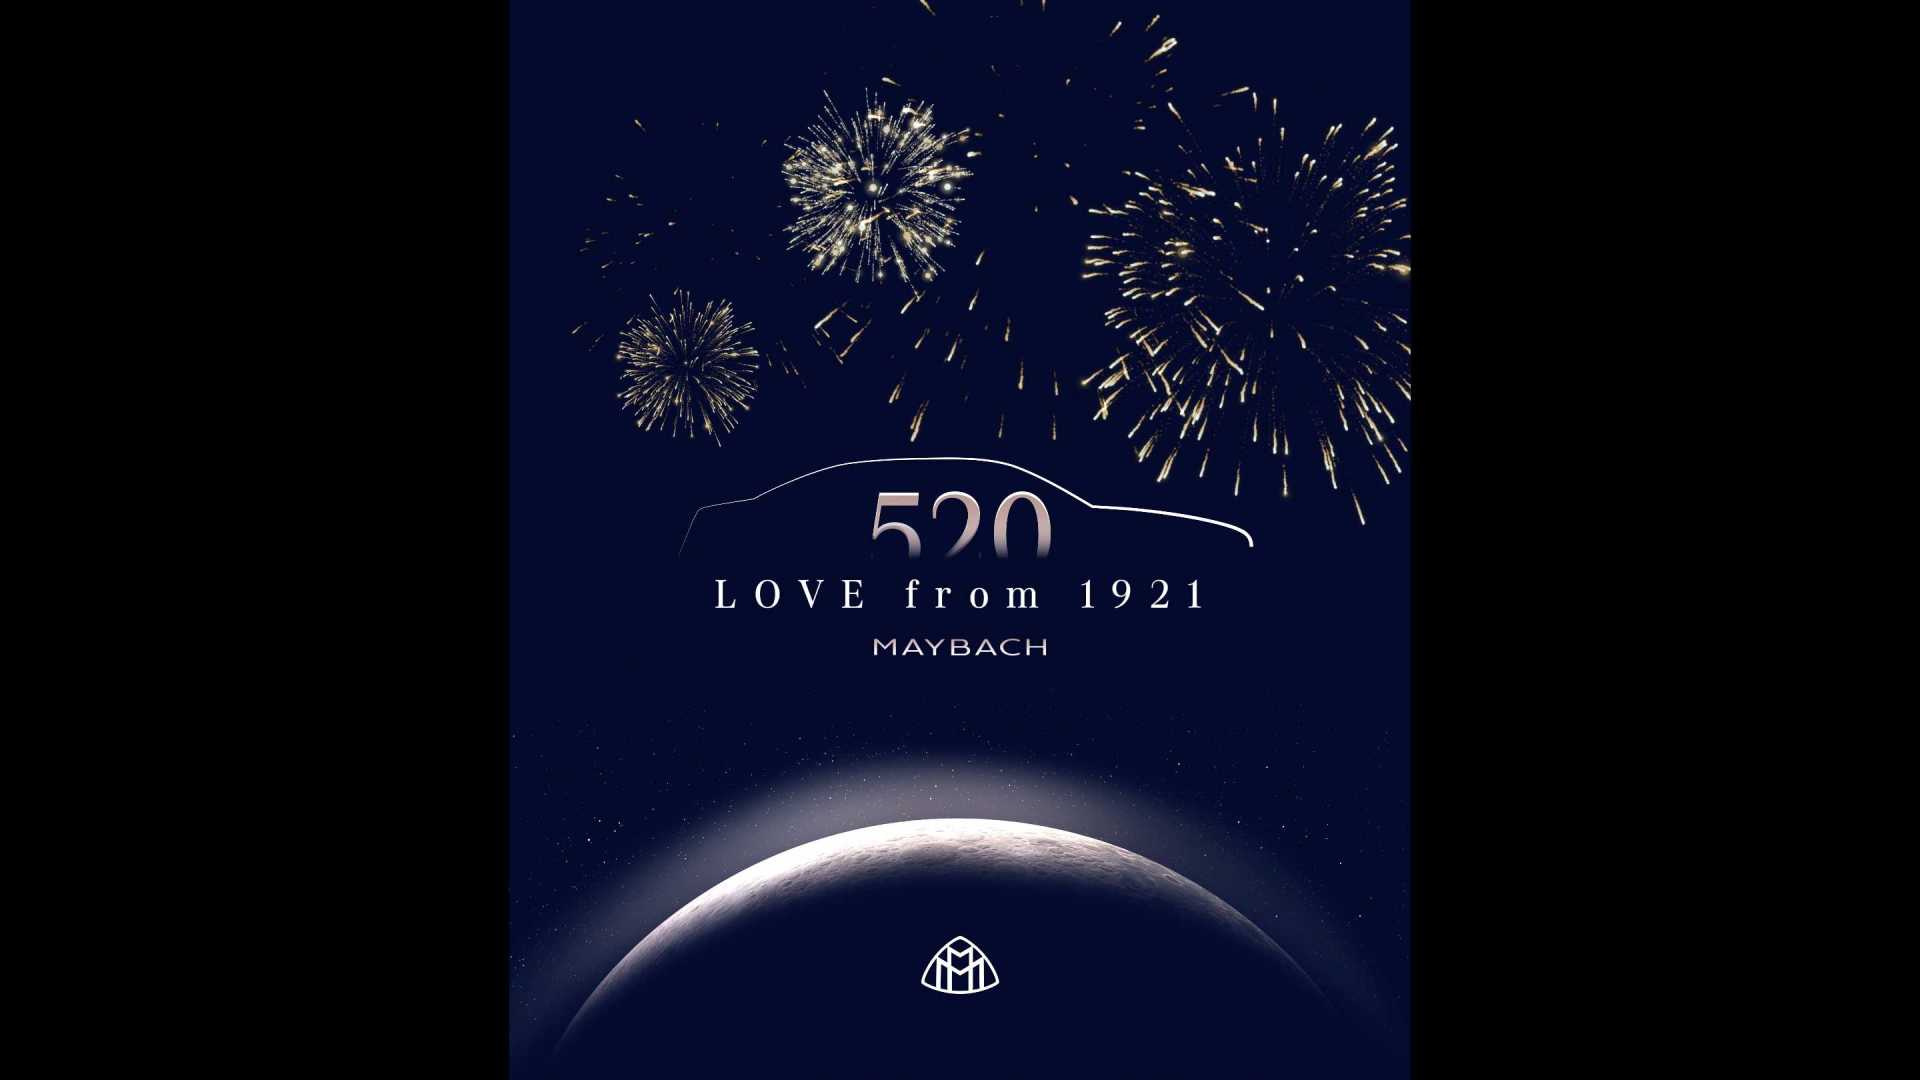 Love from 1921- Maybach